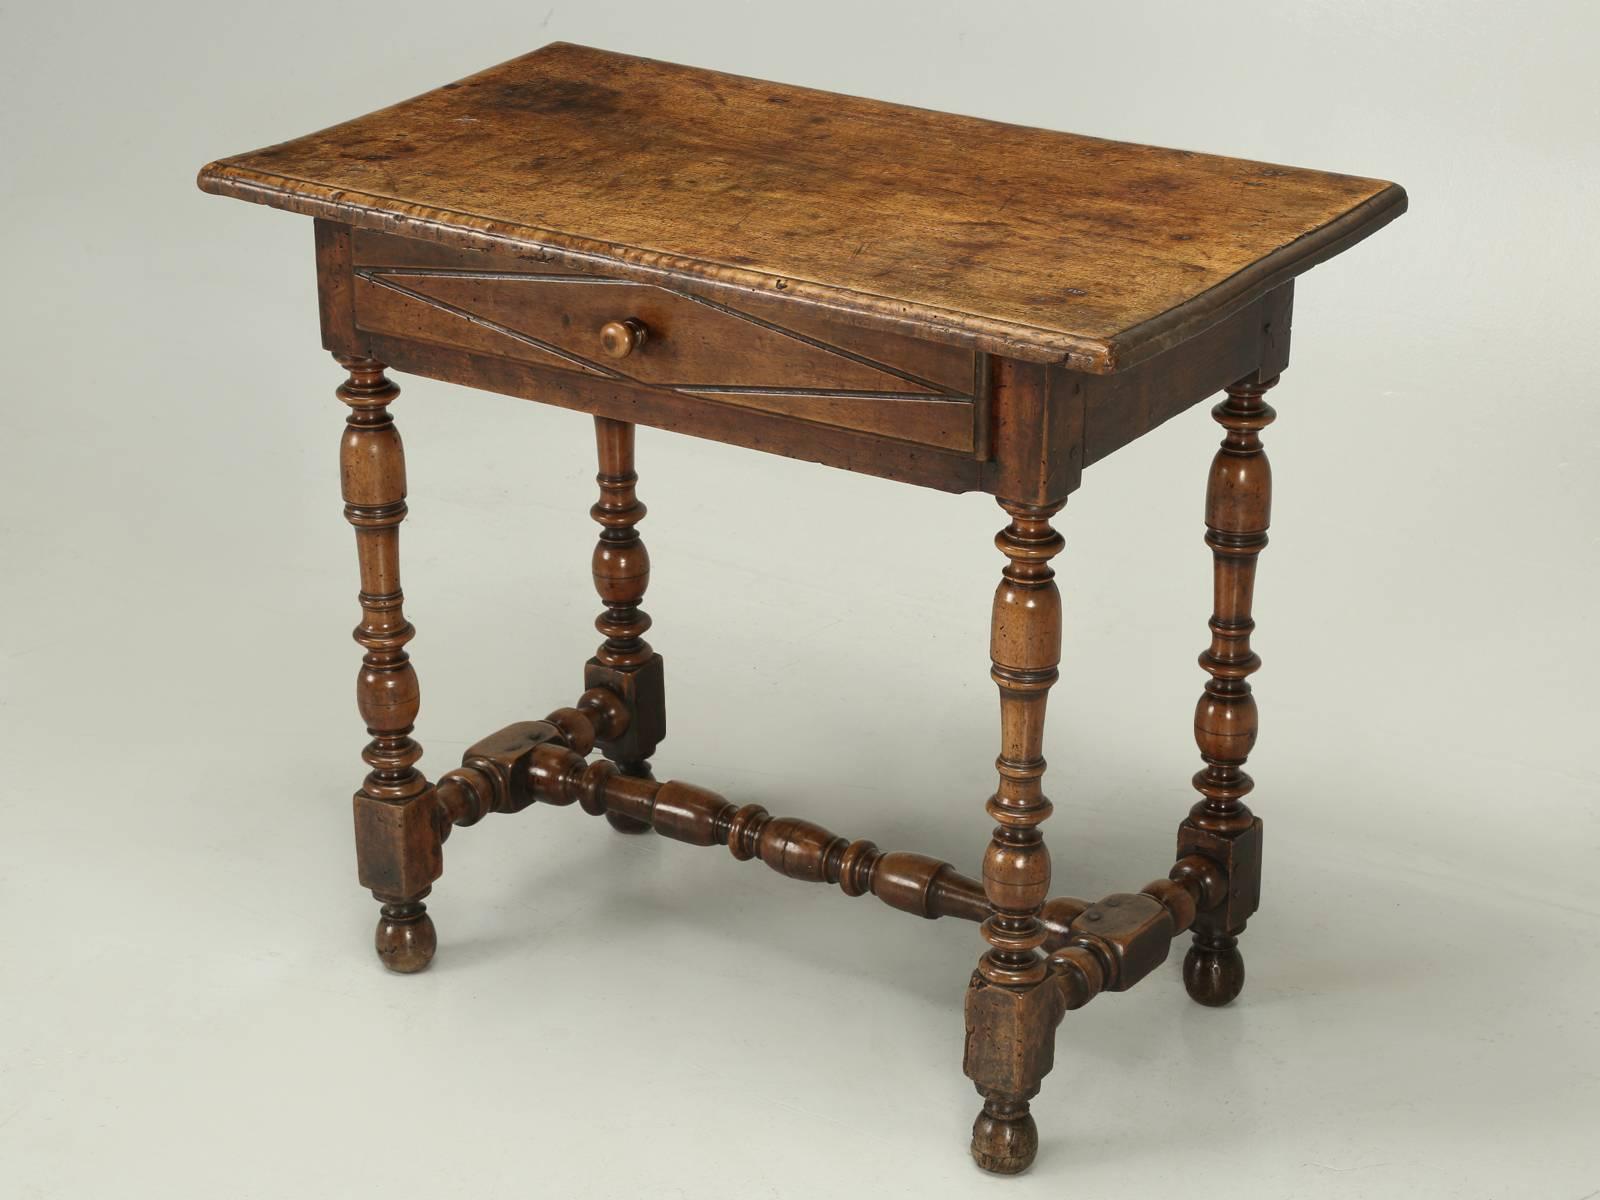 Antique Country French side or end table, dating all the way back to the early 1700s. The top is made from one magnificent board of walnut and almost looks burl. The expert in France wrote; époque, beginning of the XVIIIeme. So, our antique French